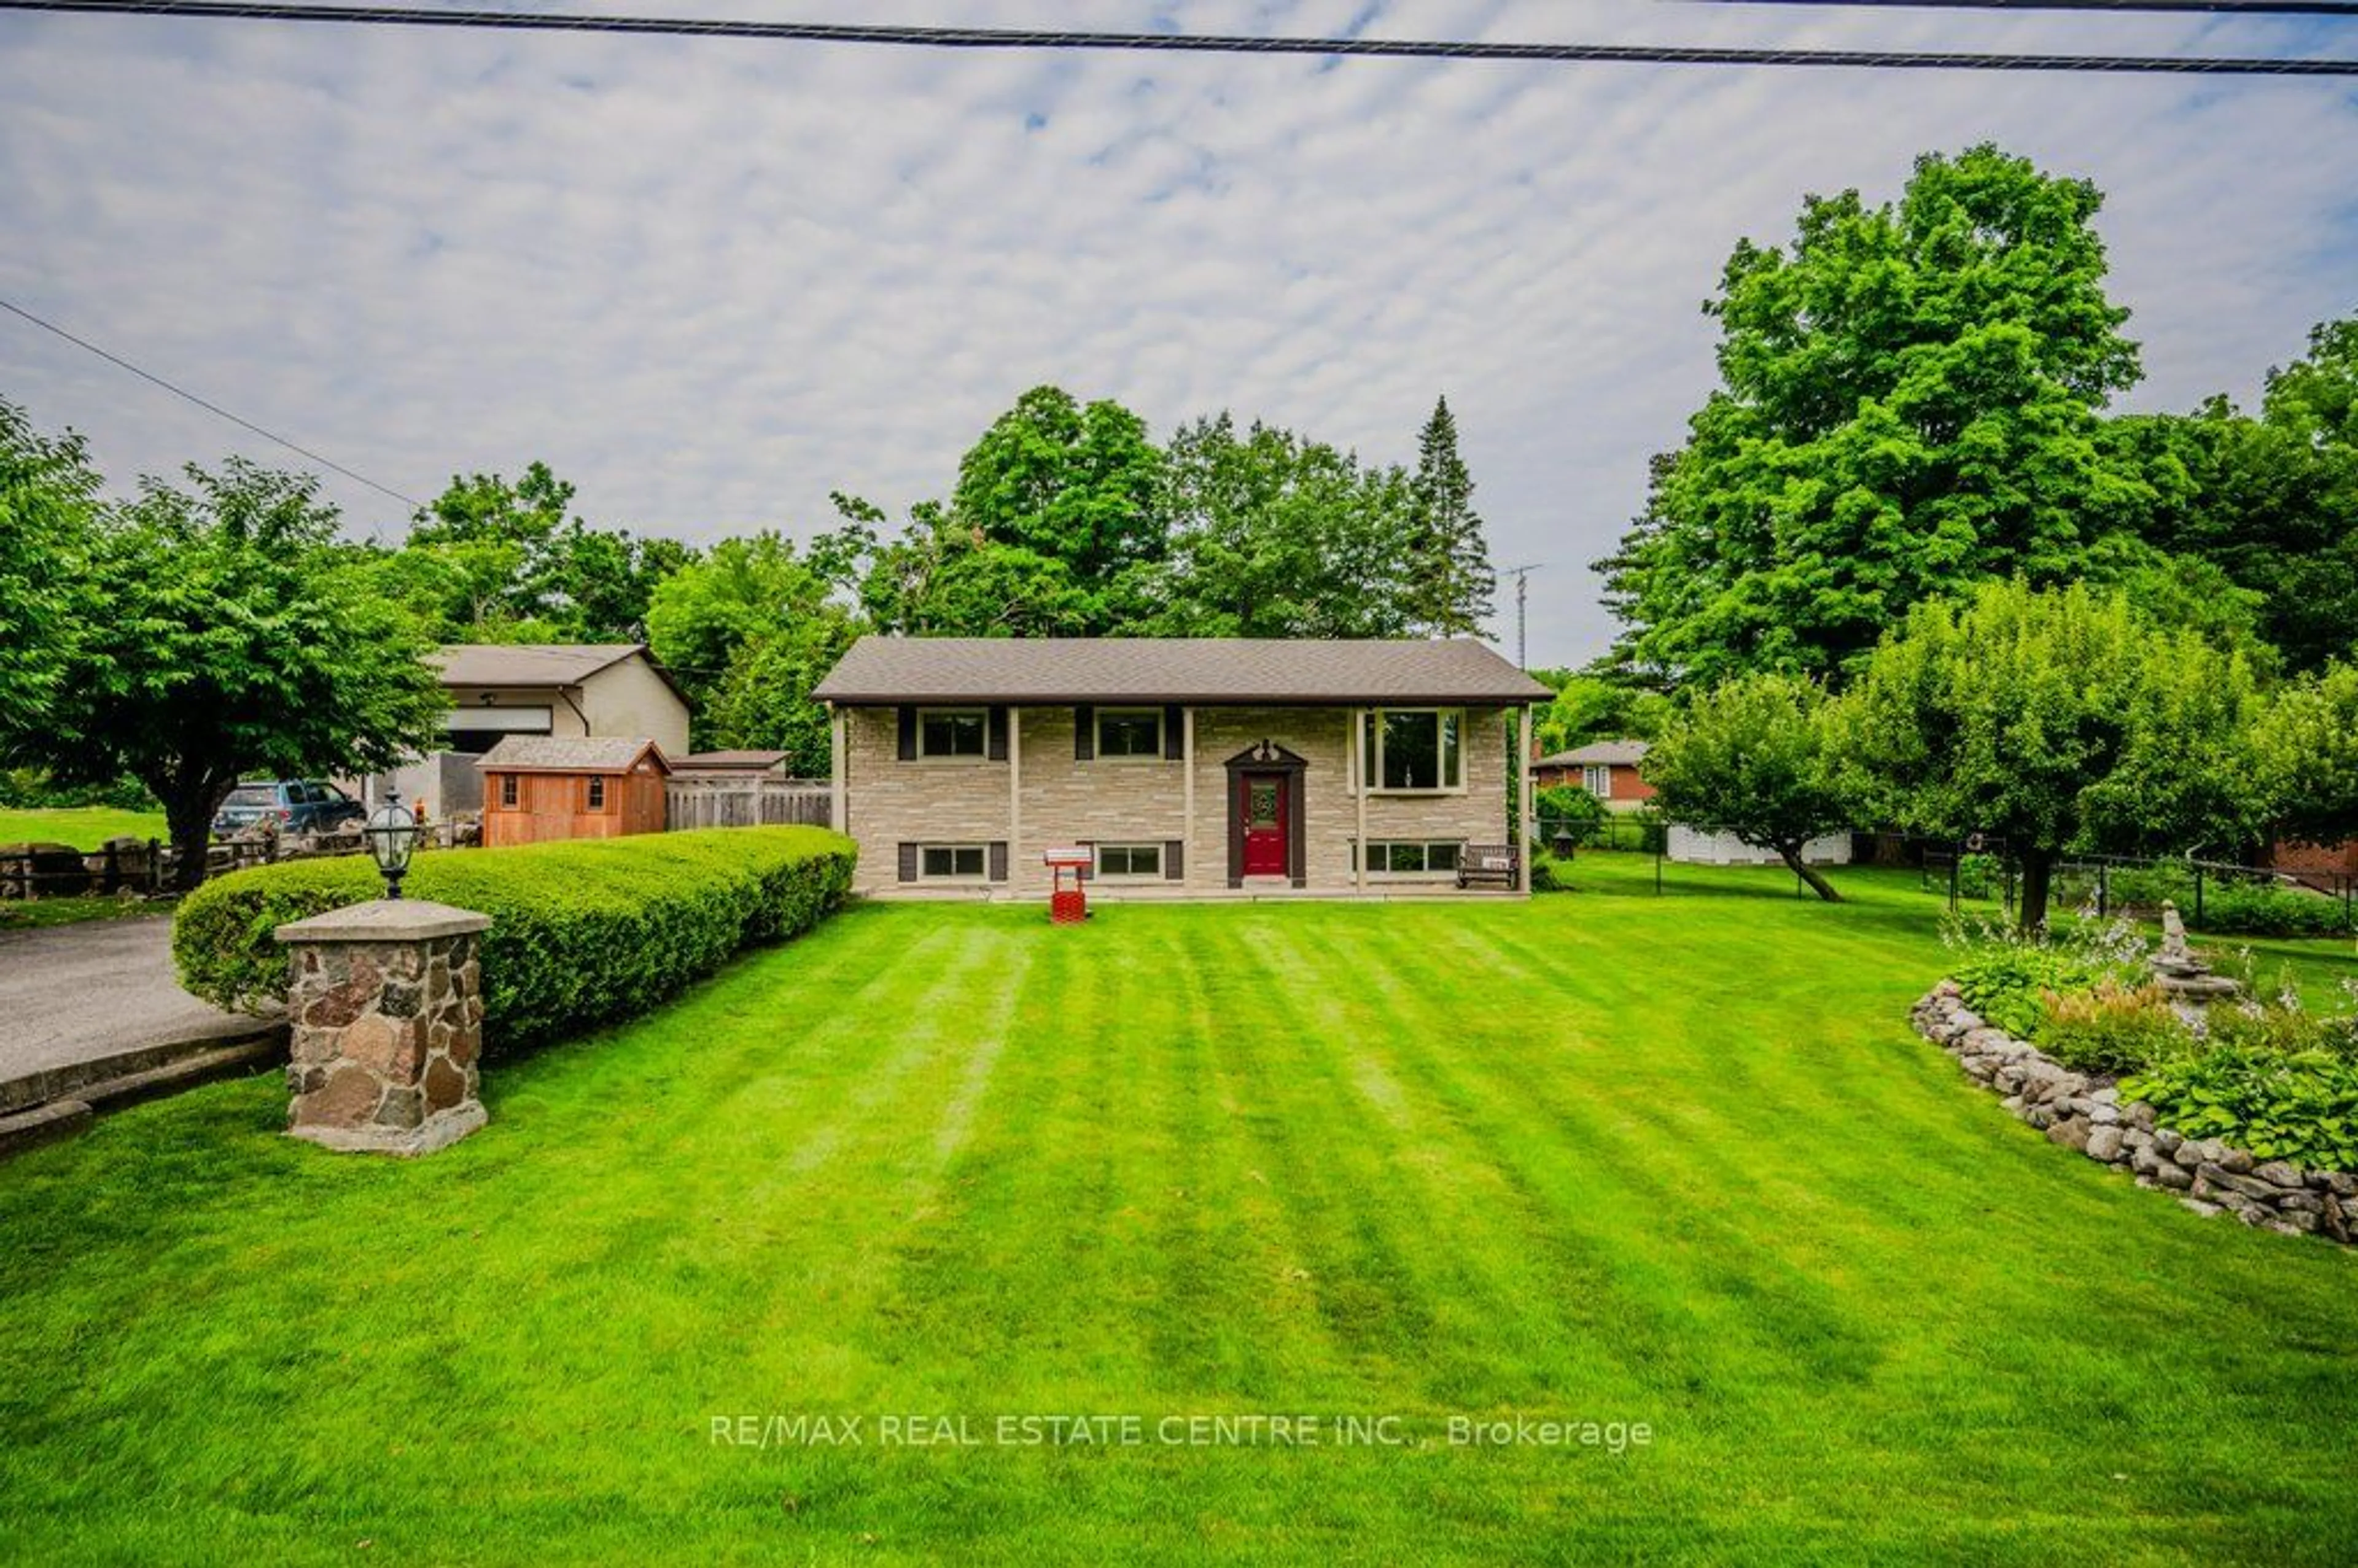 Frontside or backside of a home for 1688 Branchton Rd, North Dumfries Ontario N0B 1L0